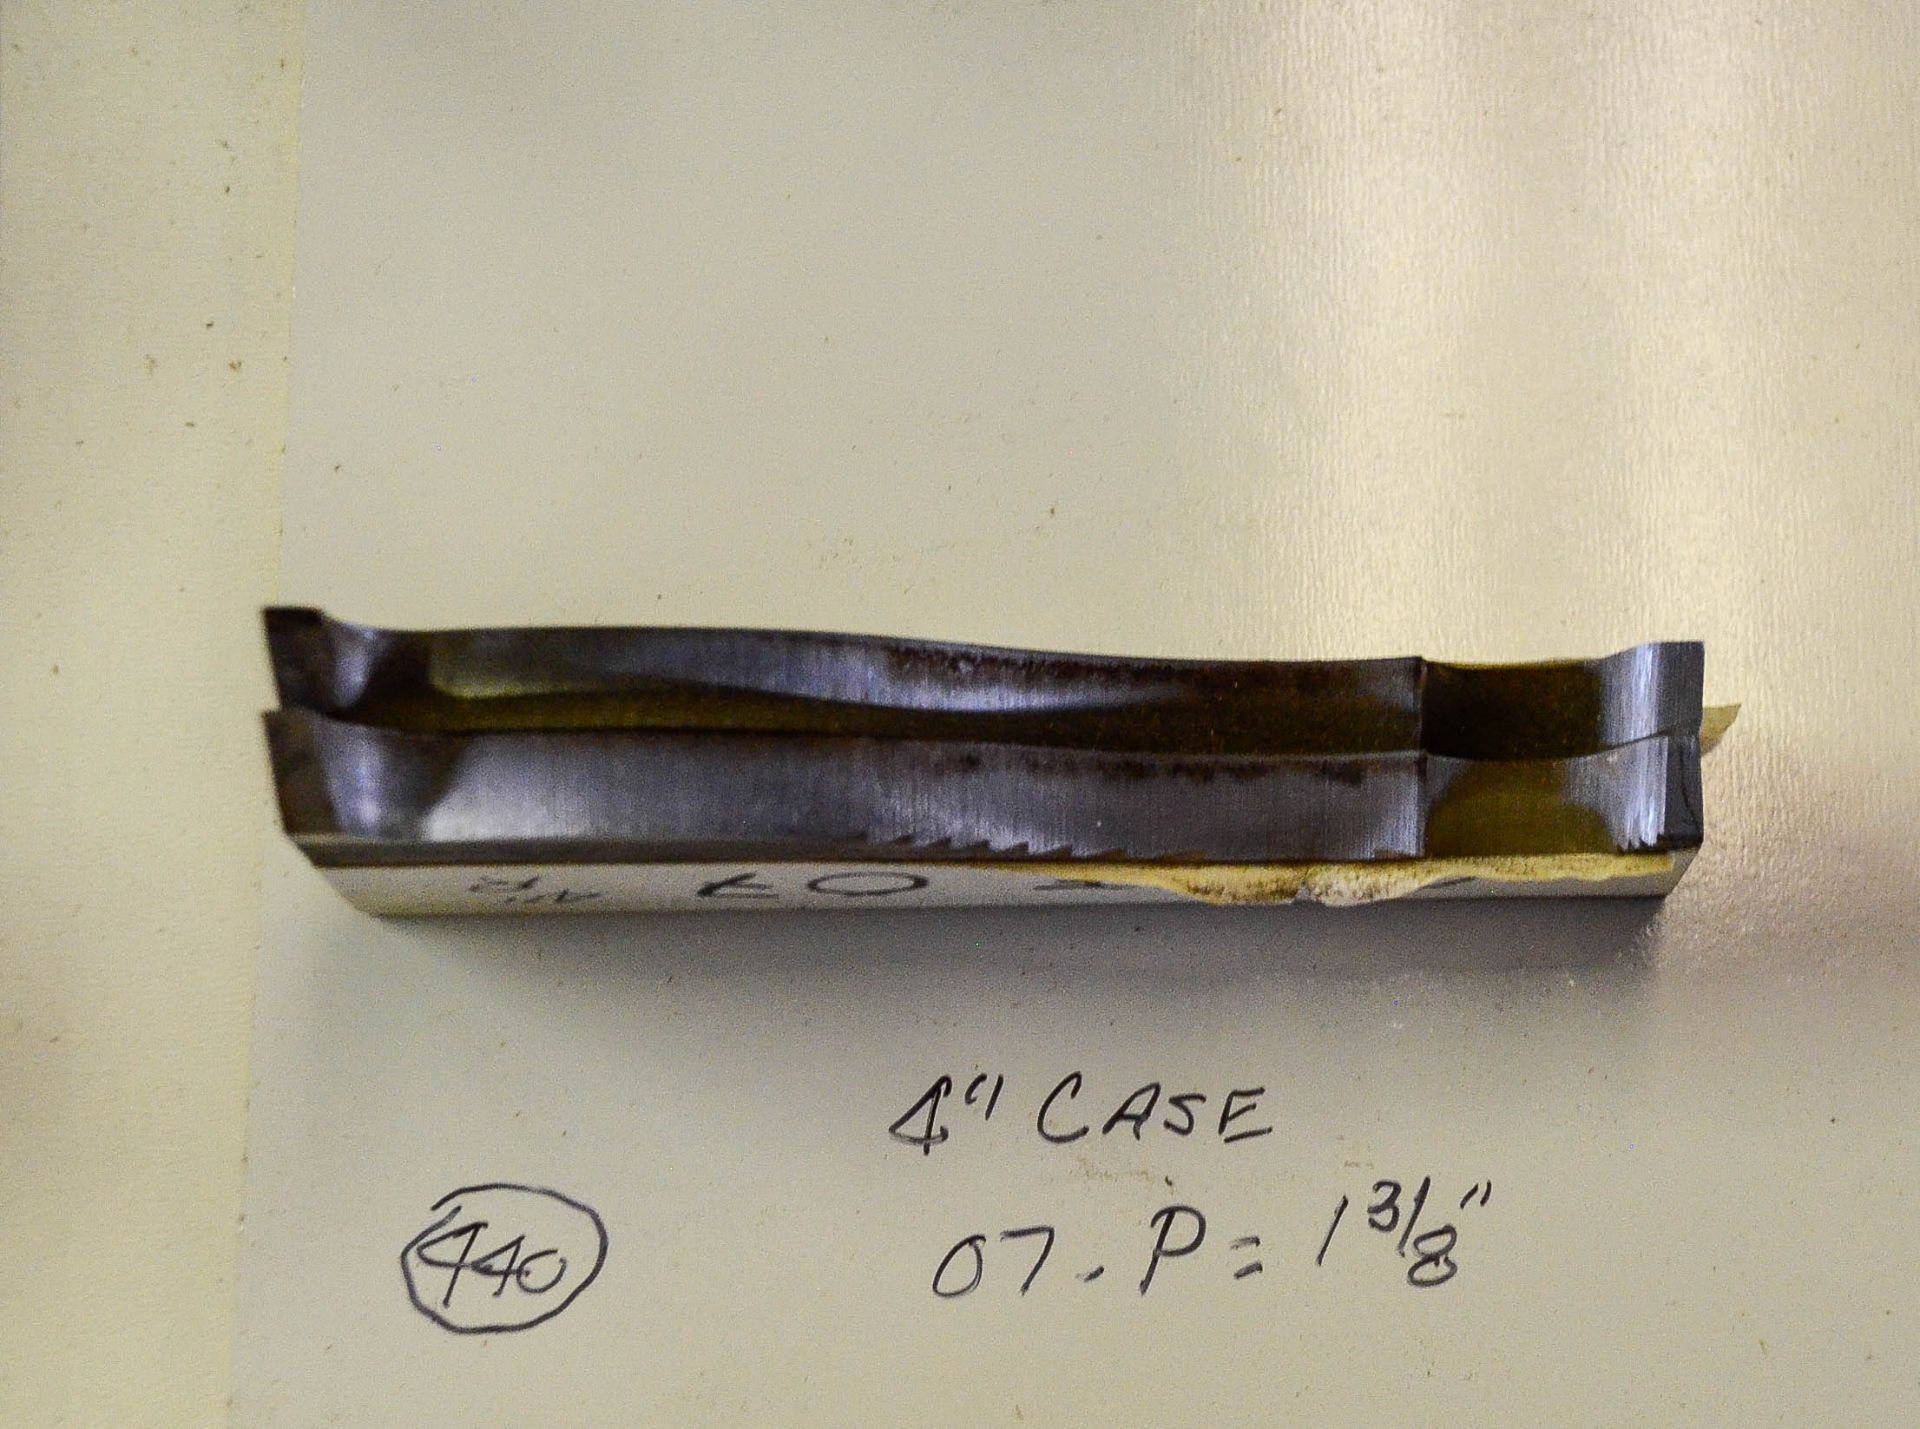 Moulding Knives, 4" Case, 07 - P = 1-3/8", No Template, Knives are in Good Condition and Ready - Image 2 of 2